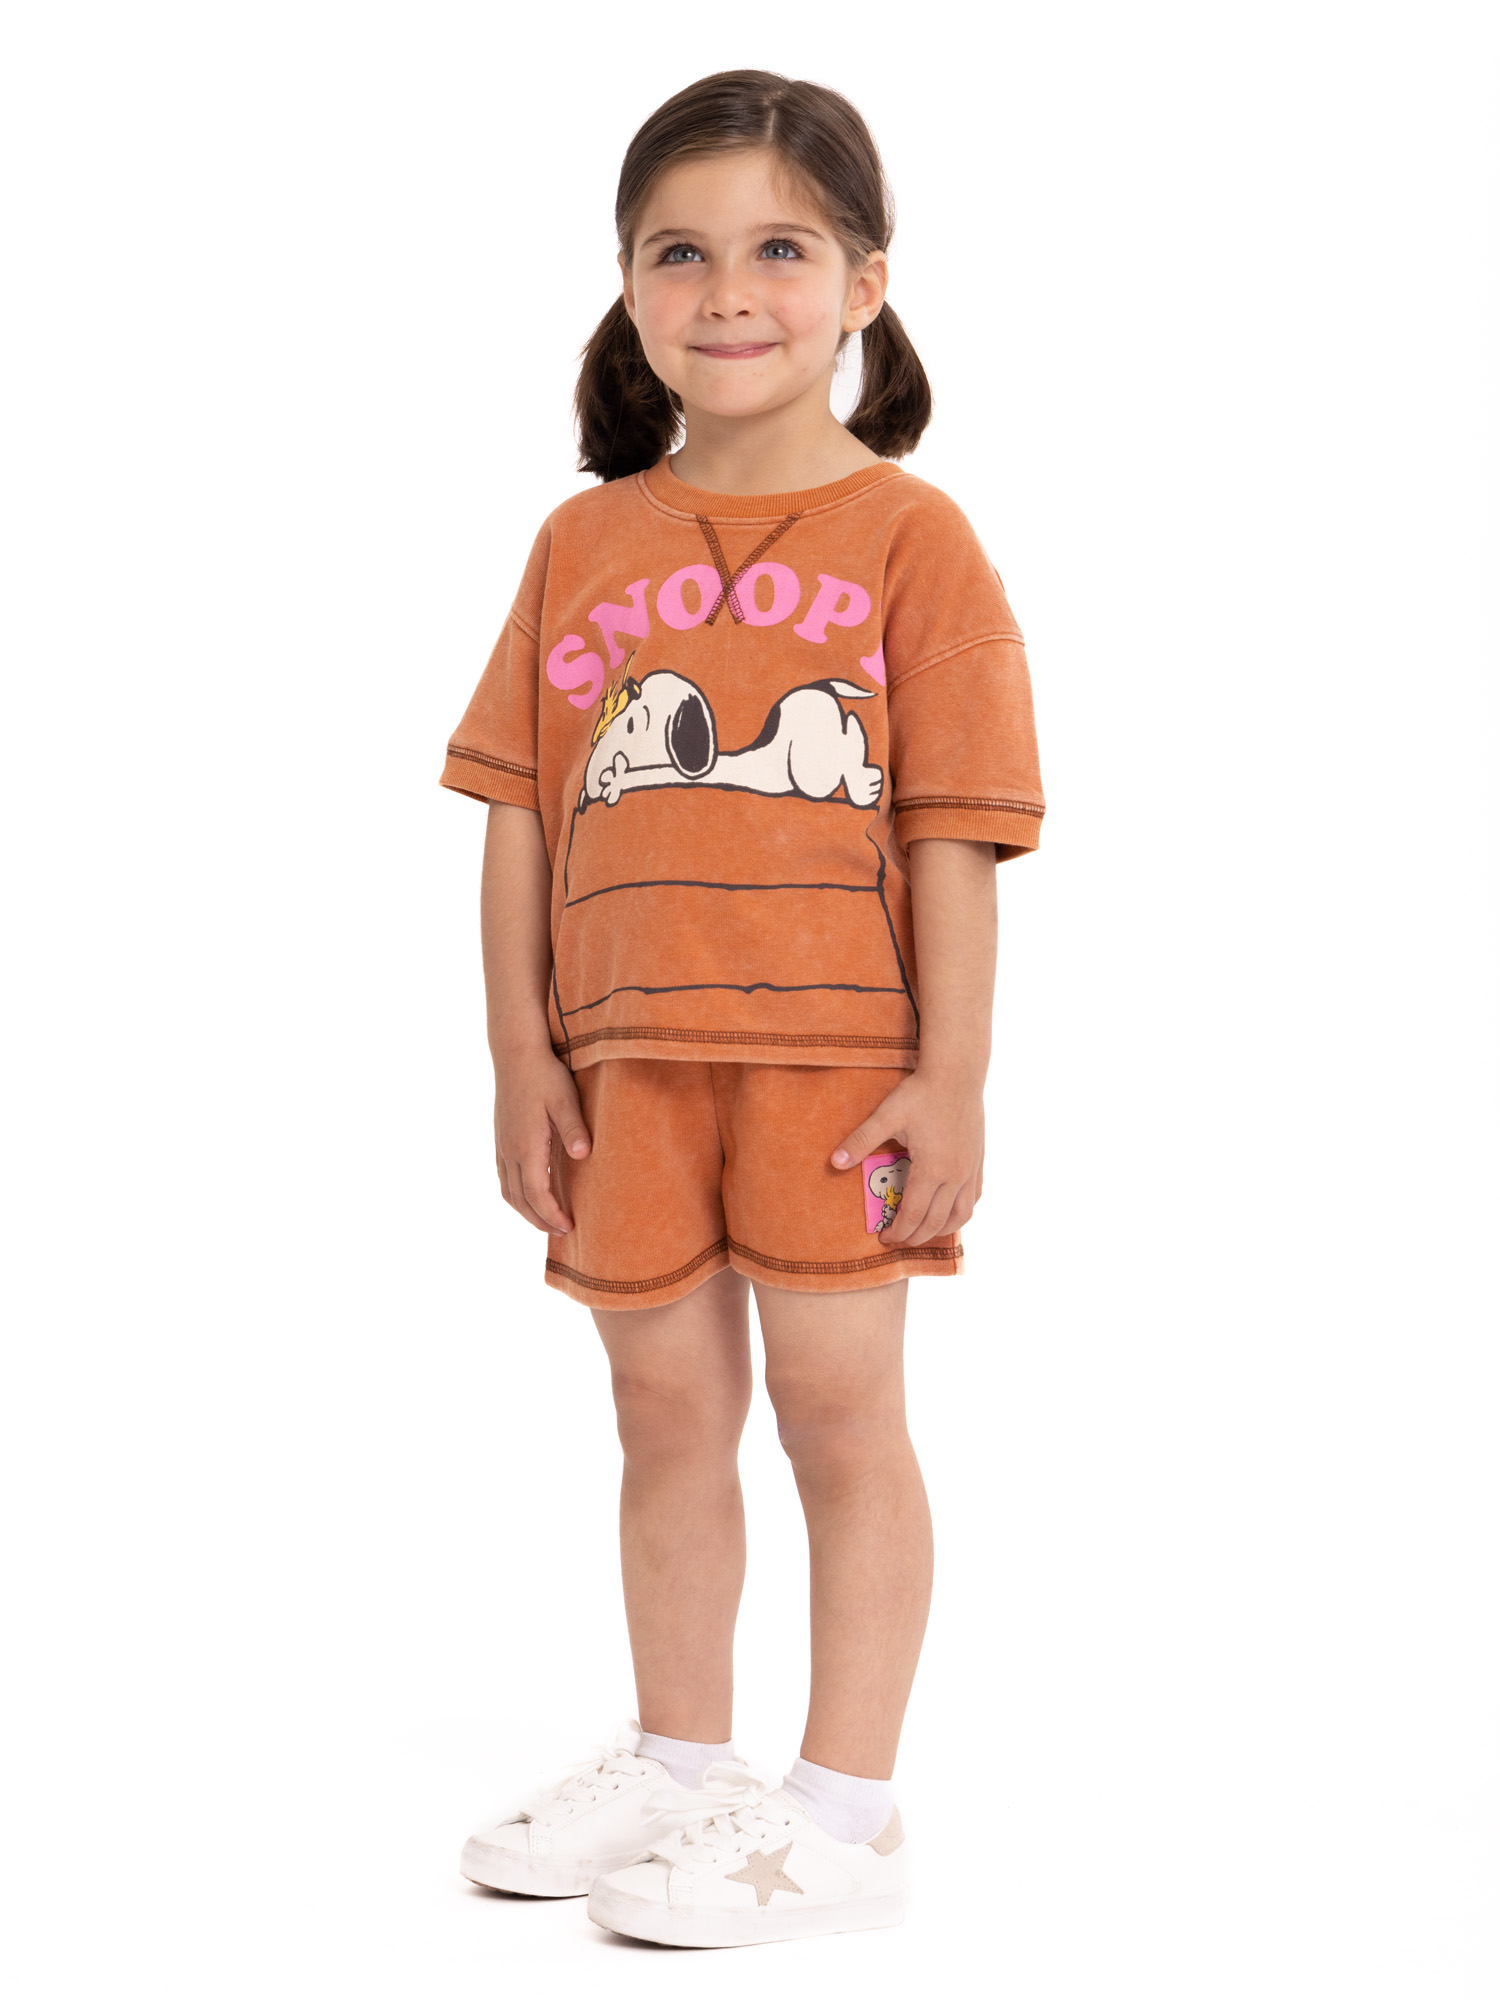 Snoopy Toddler Girls Tee and Shorts Set, 2-Piece, Sizes 12M-5T - image 3 of 12